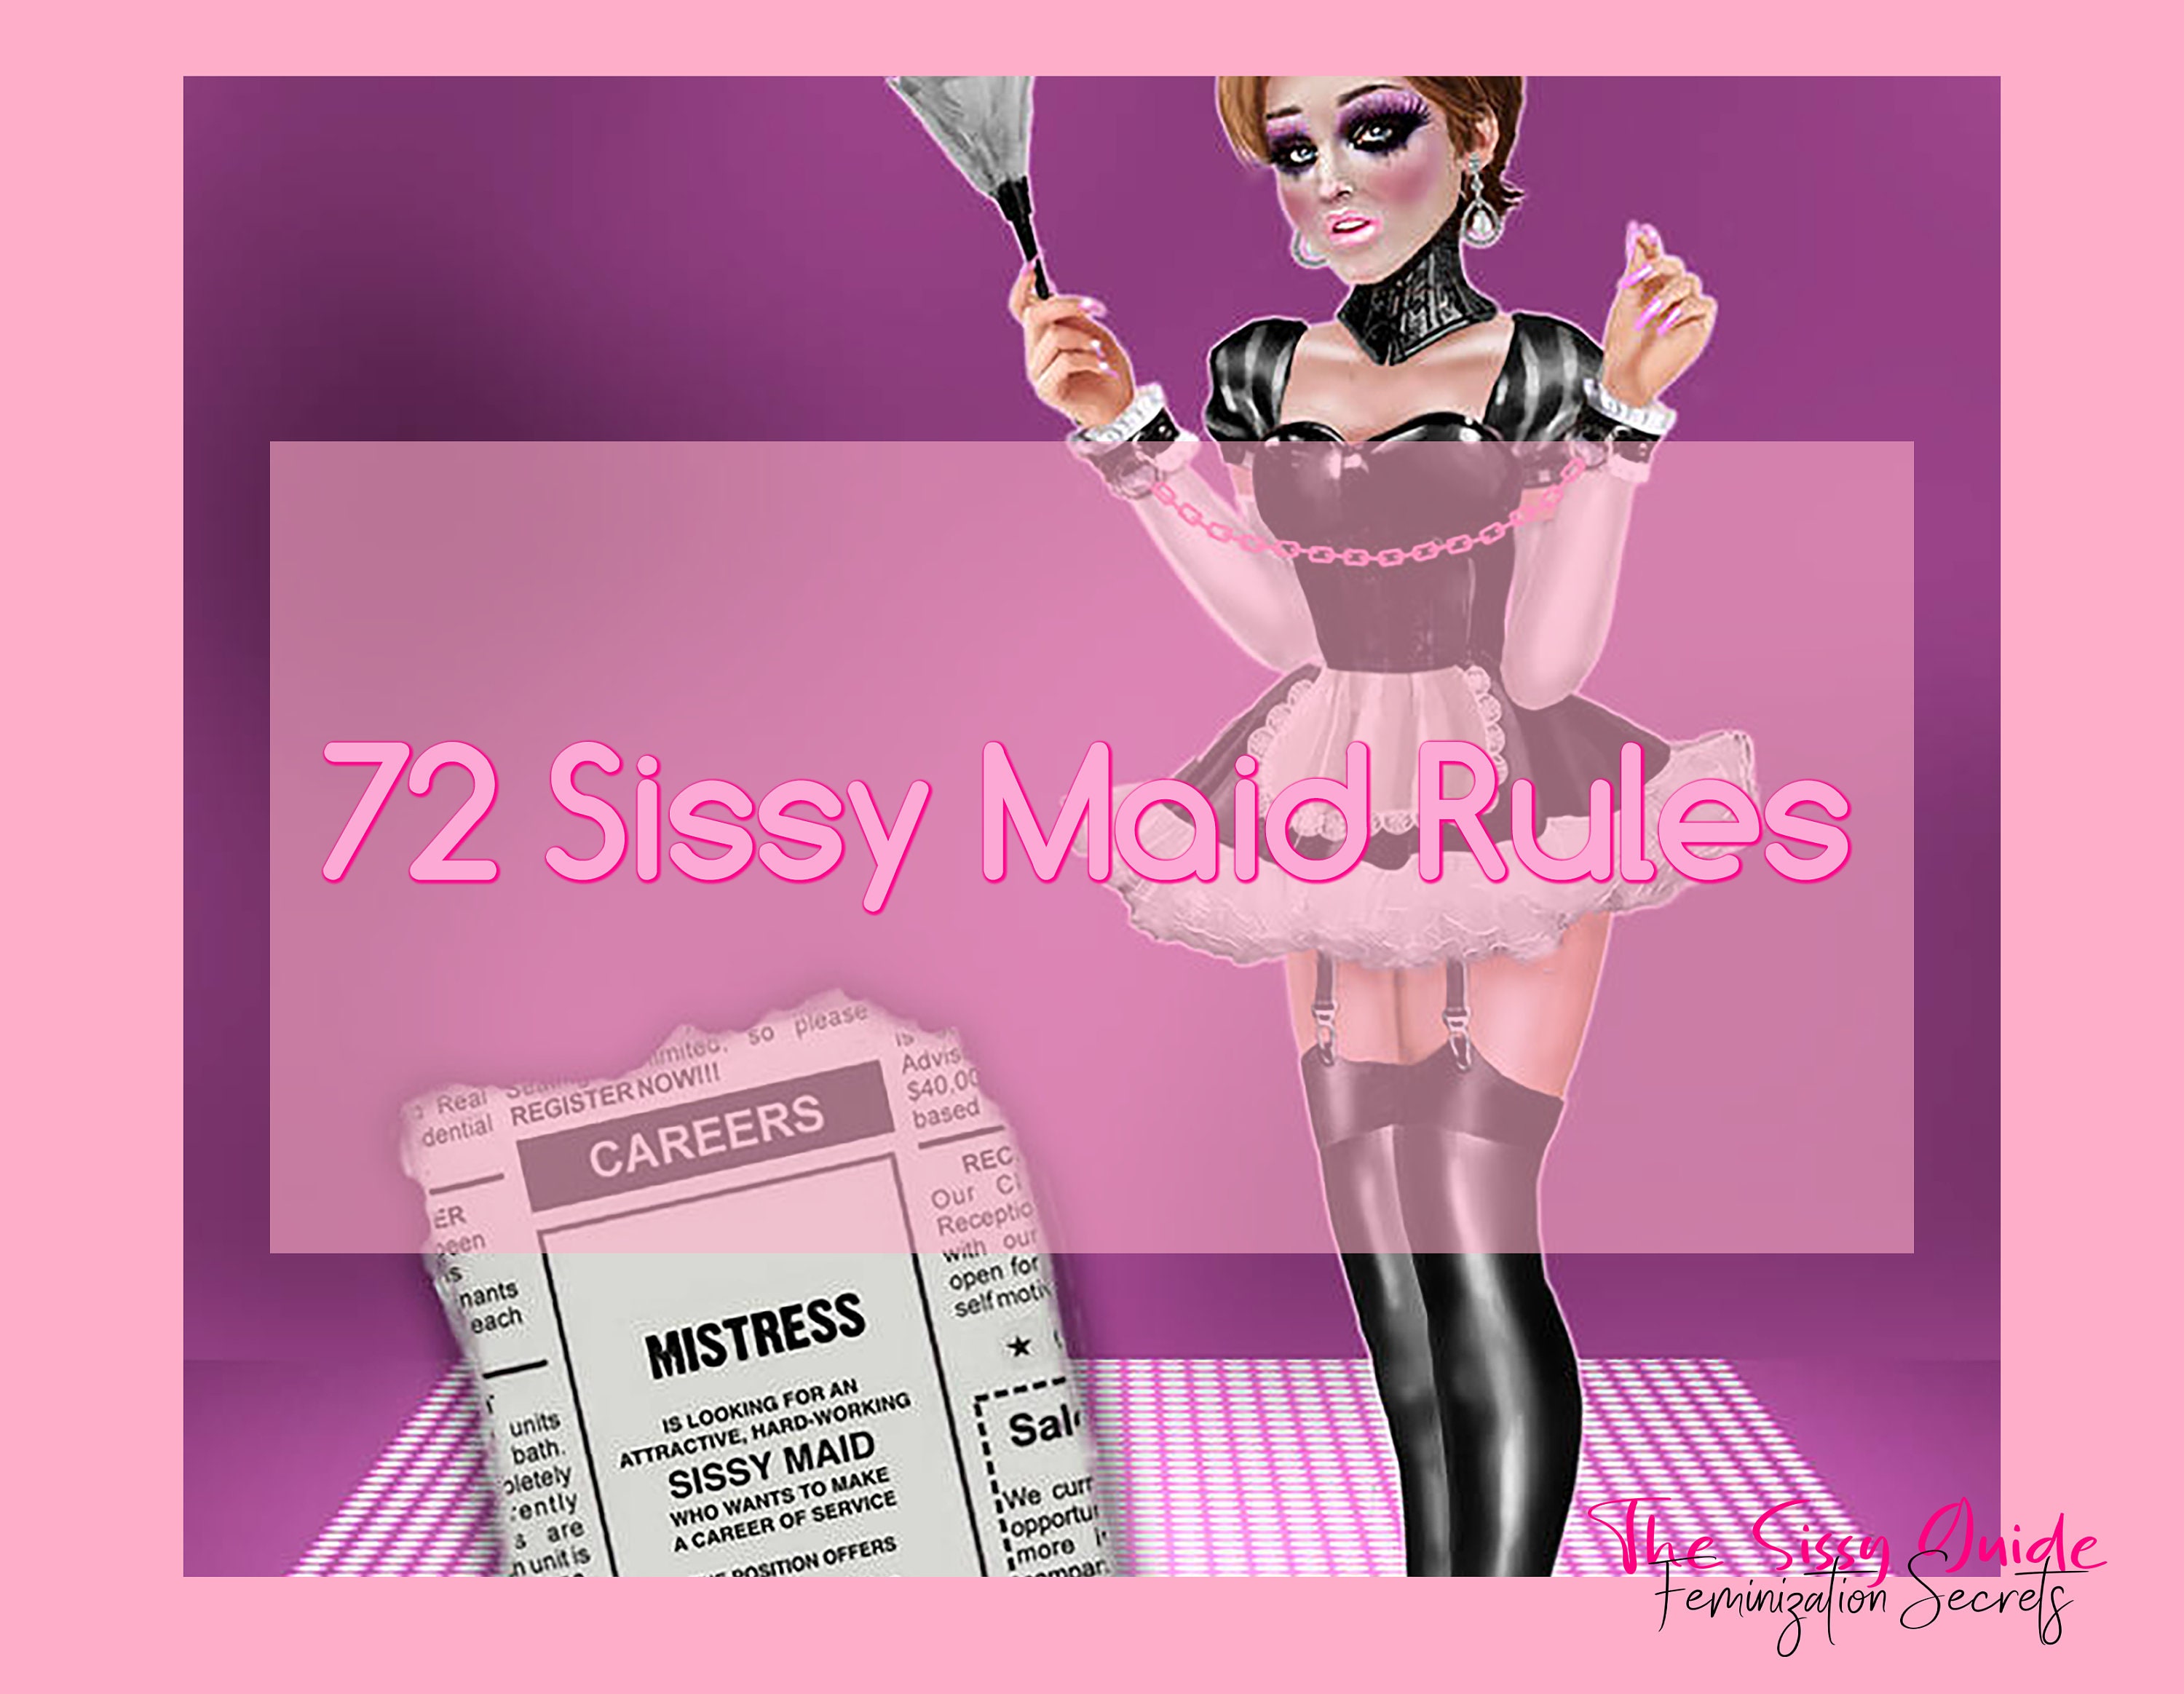 crystal ozment recommends Training A Sissy Slave